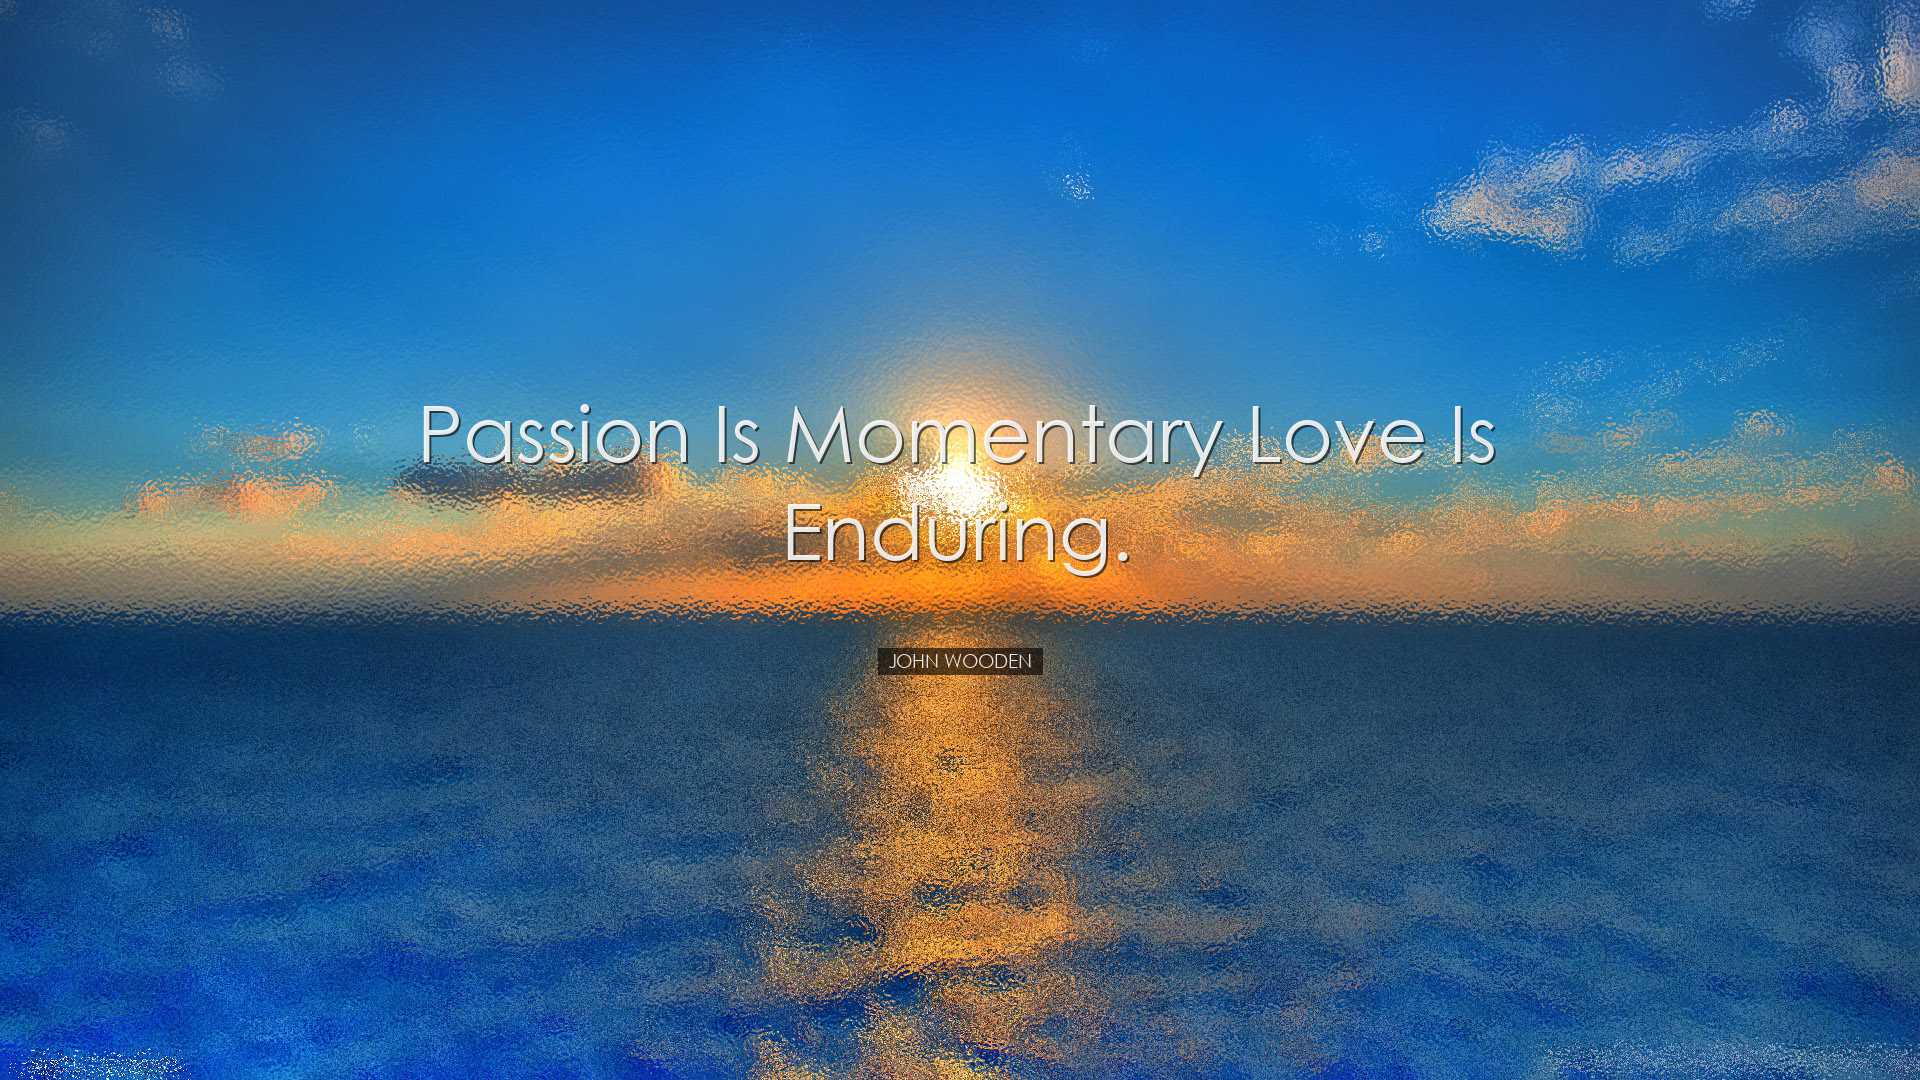 Passion is momentary love is enduring. - John Wooden